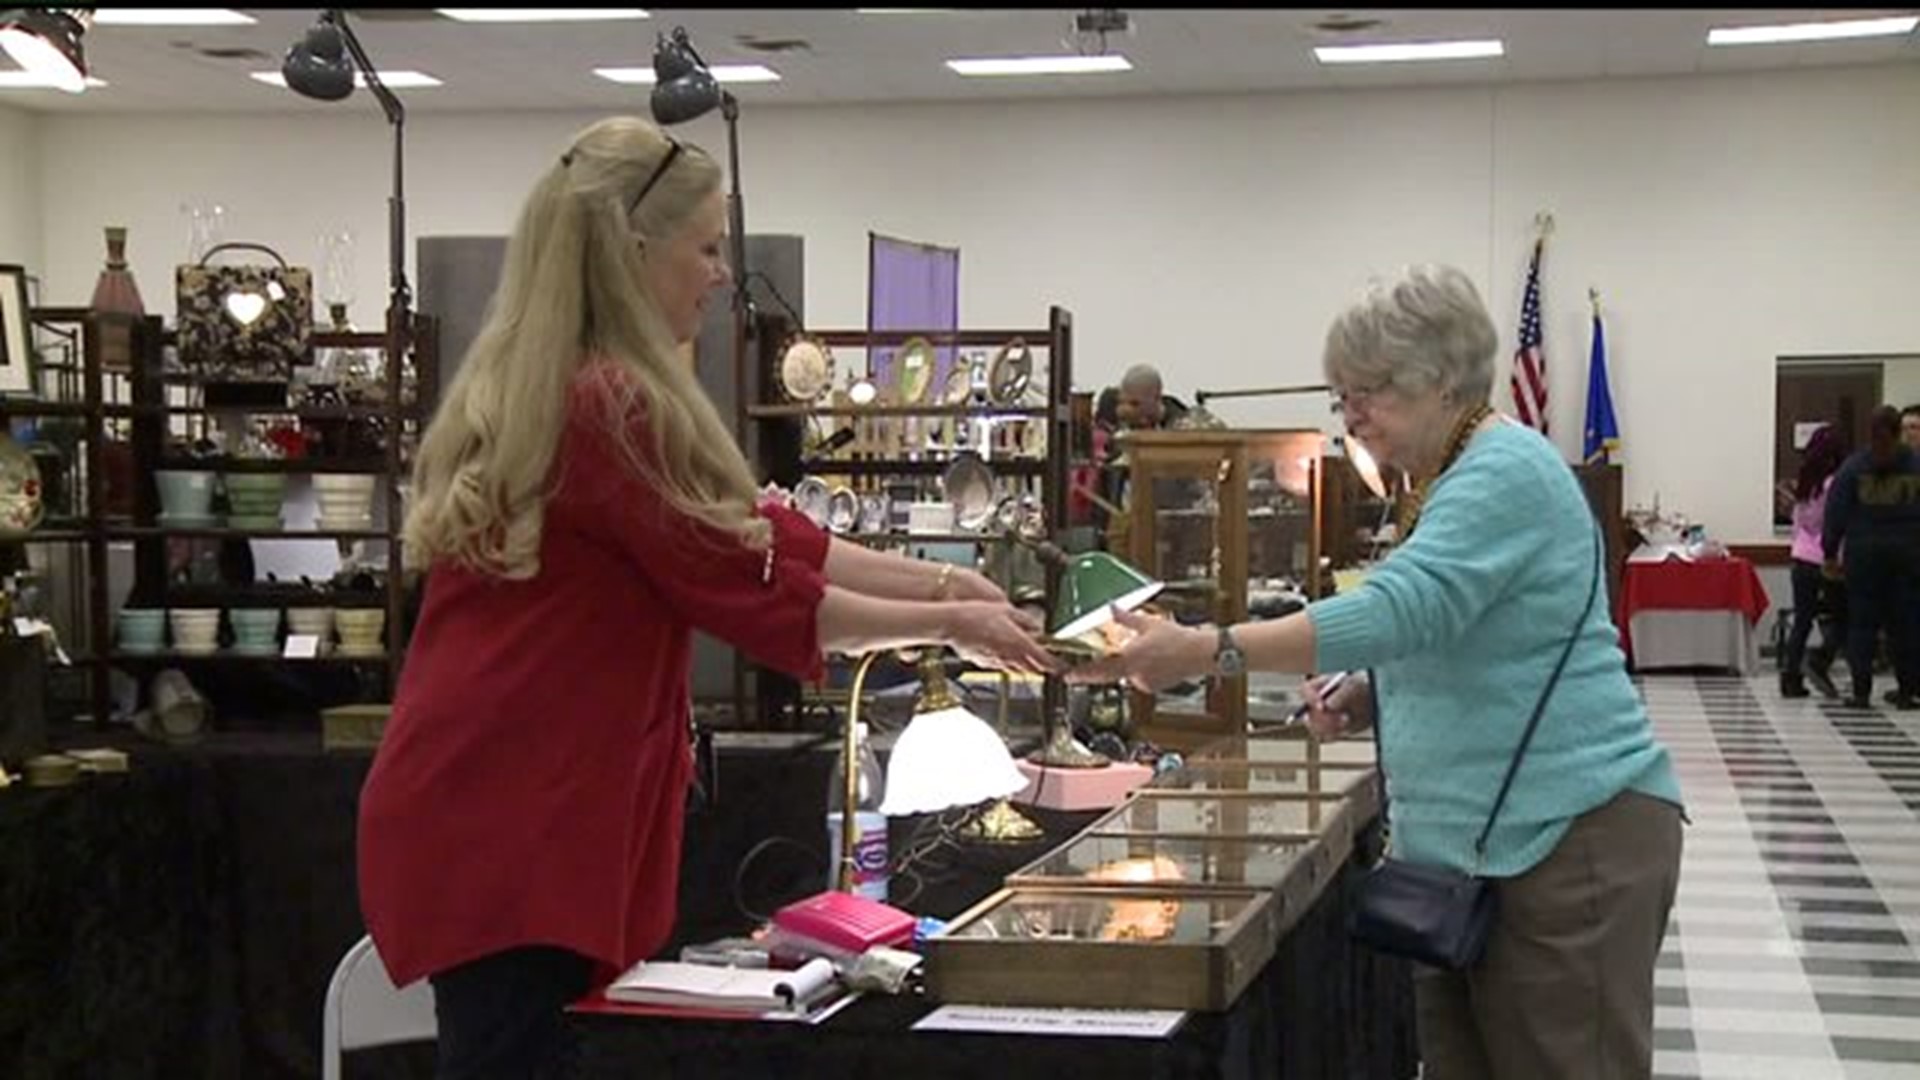 59th Annual Antique Show in Rock Island